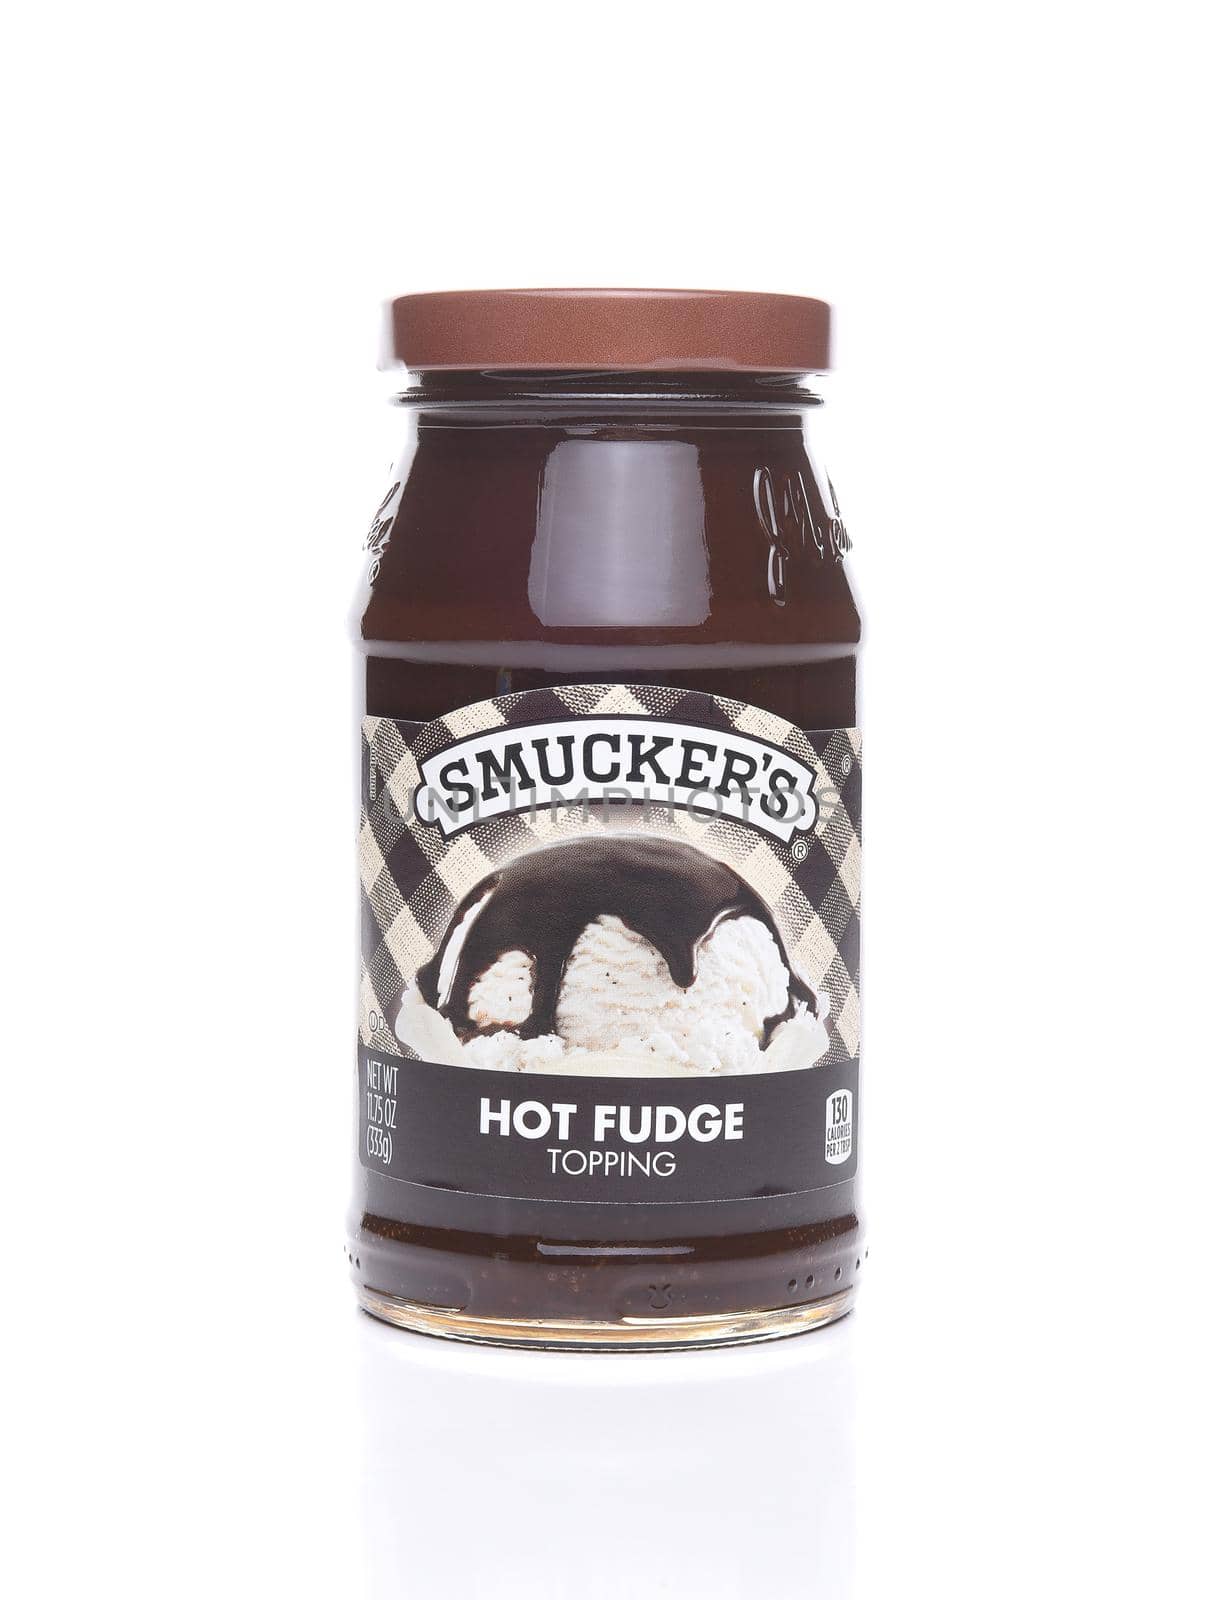 IRVINE, CALIFORNIA - AUGUST 21, 2017:  Smuckers Hot Fudge Topping. Smuckers offers a broad range of fruit spreads, ice cream toppings, syrups, peanut butters, and more.